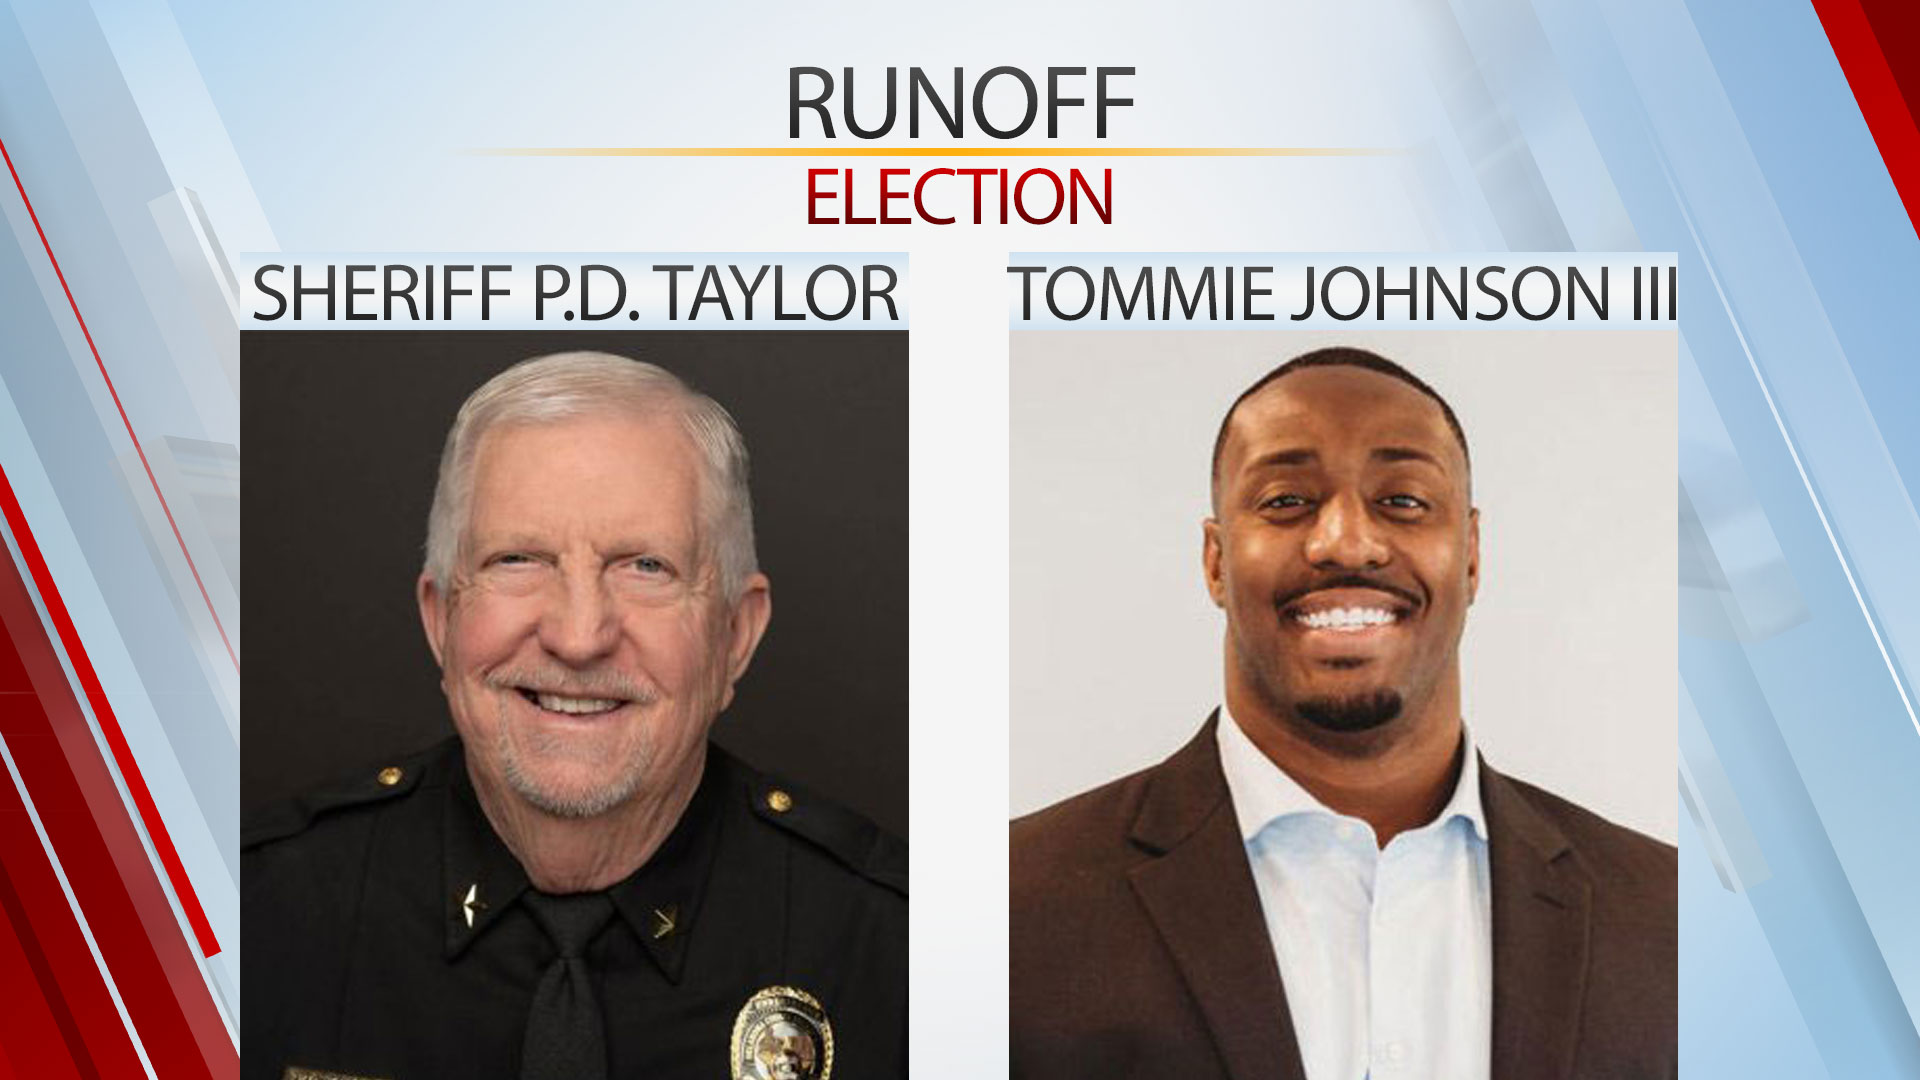 Sheriff P.D. Taylor, Tommie Johnson Face Off In Republican Run-Off For Okla. Co. Sheriff